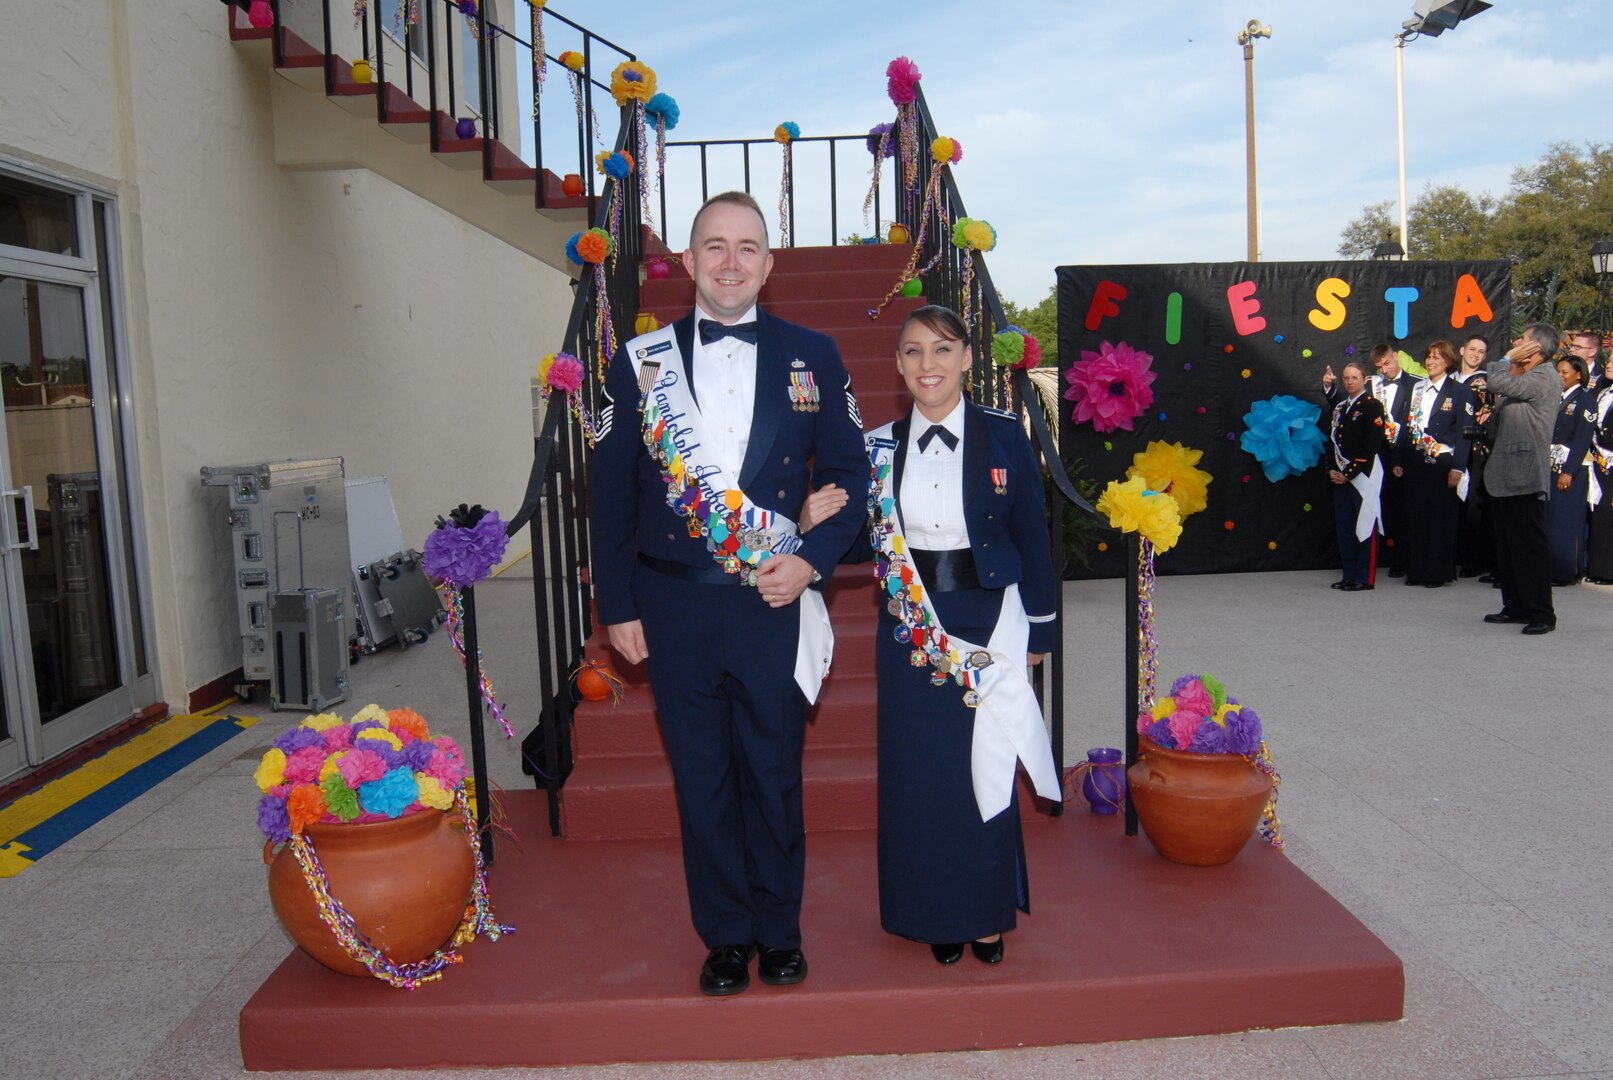 Master Sgt. Jeff Womack (left) and 1st Lt. Jennifer Ferrer represented Randolph at the 2007 Fiesta celebration. (U.S. Air Force photo by Rich McFadden)